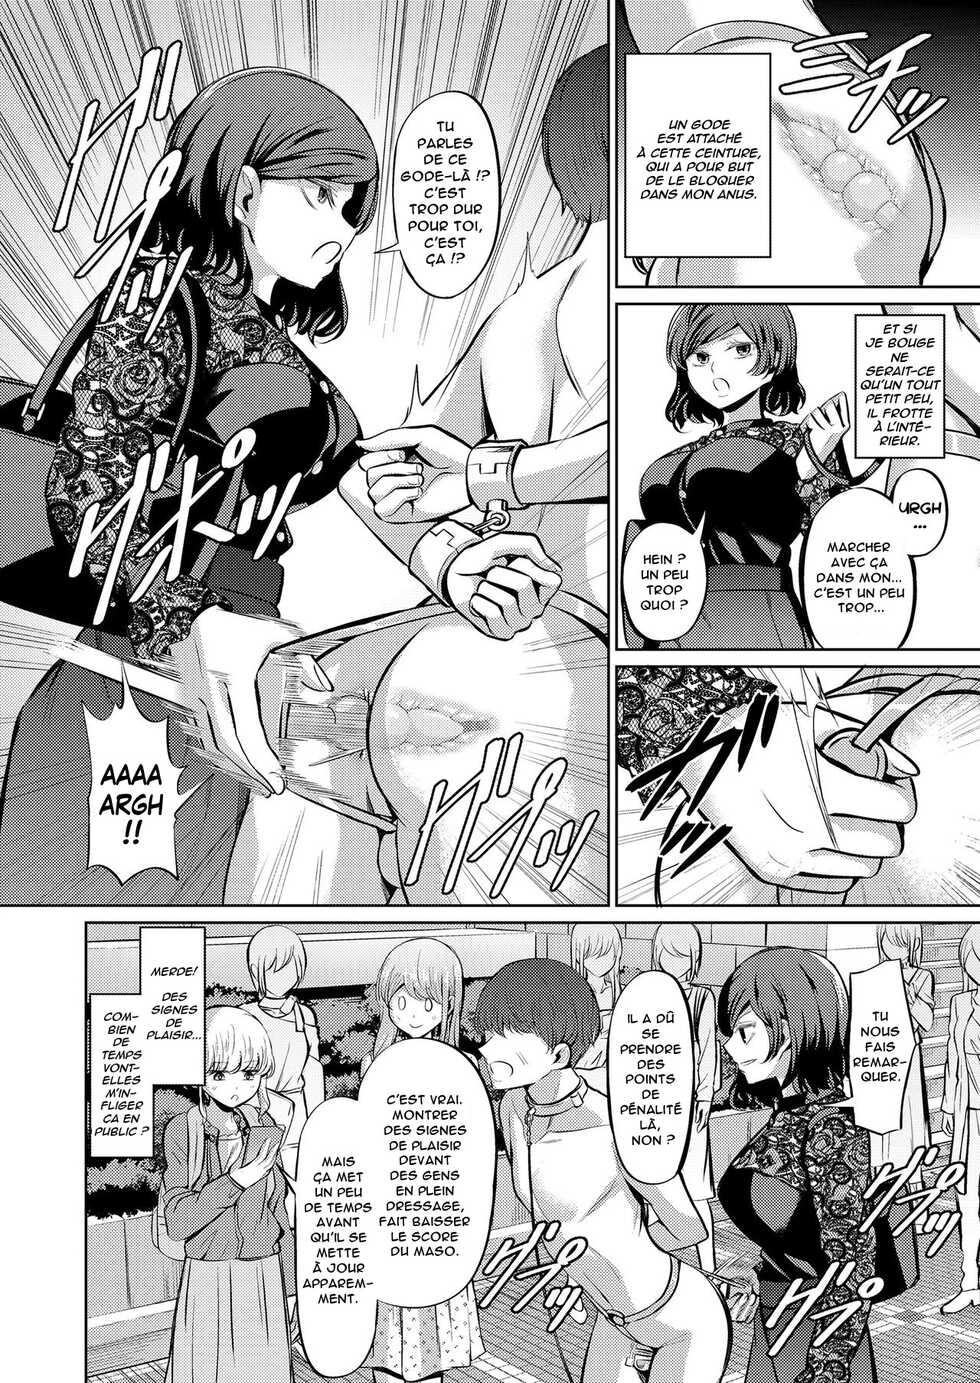 [Yamahata Rian] Tensuushugi no Kuni | A Country Based on Point System (Girls forM Vol. 20) [French] [Anatoh] [Digital] - Page 16